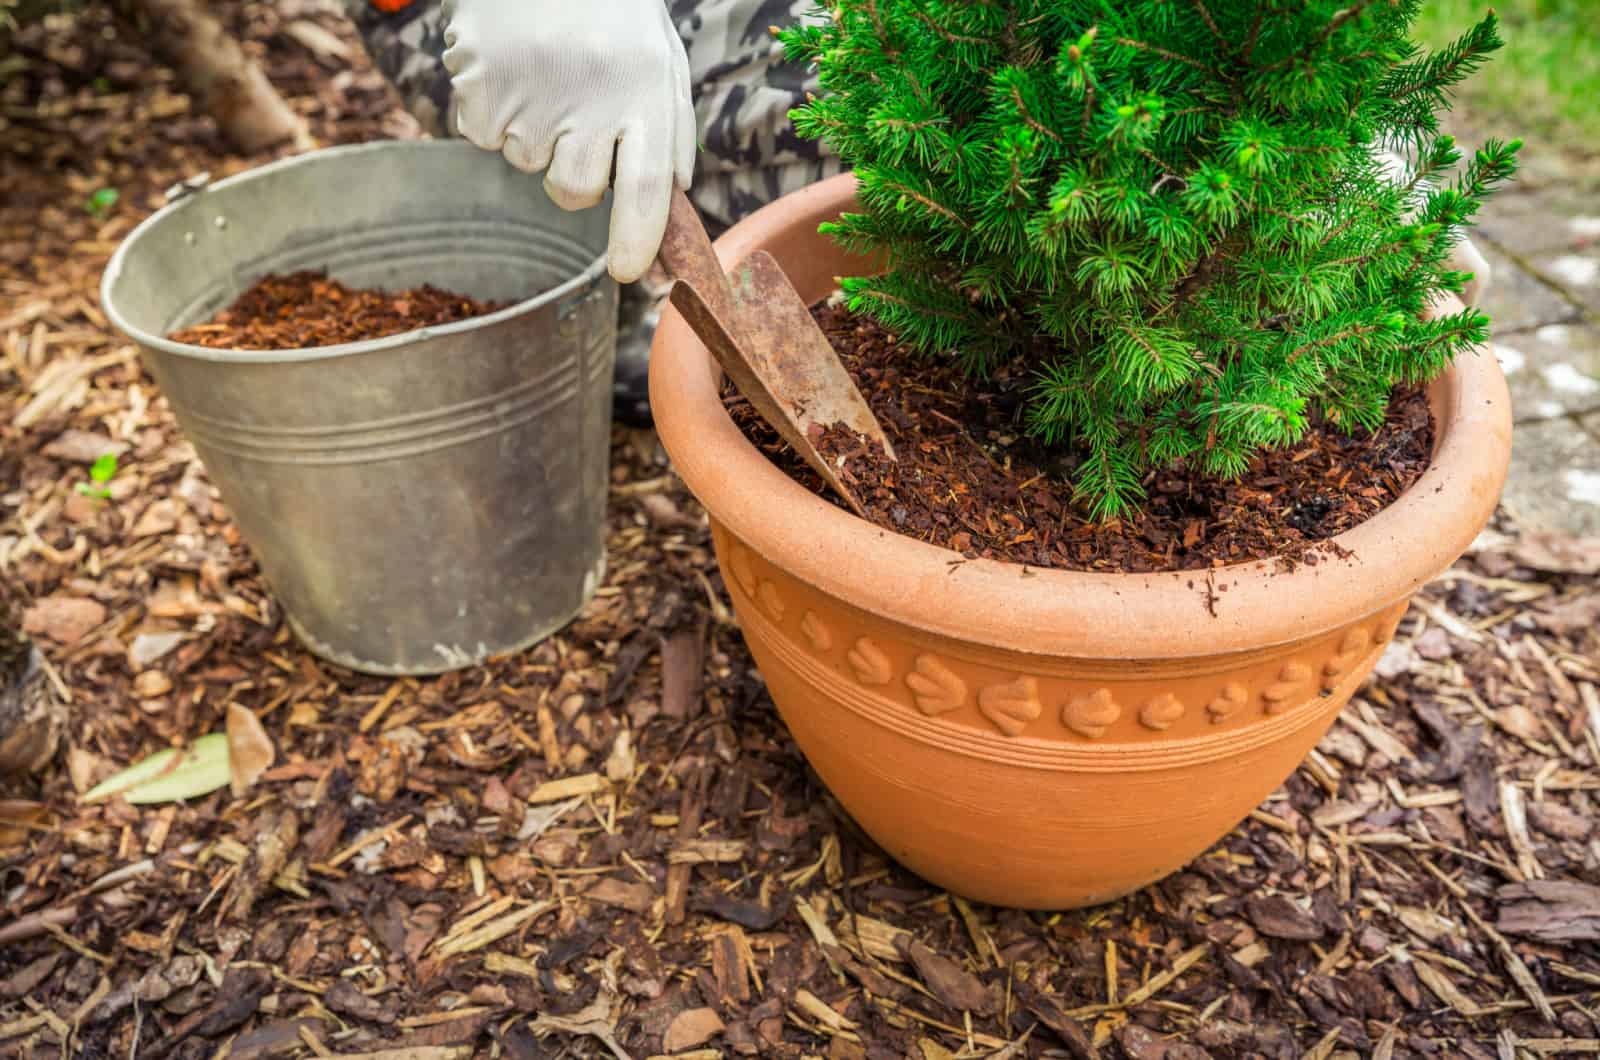 Mulch For Potted Plants: Why, What, And How To Use